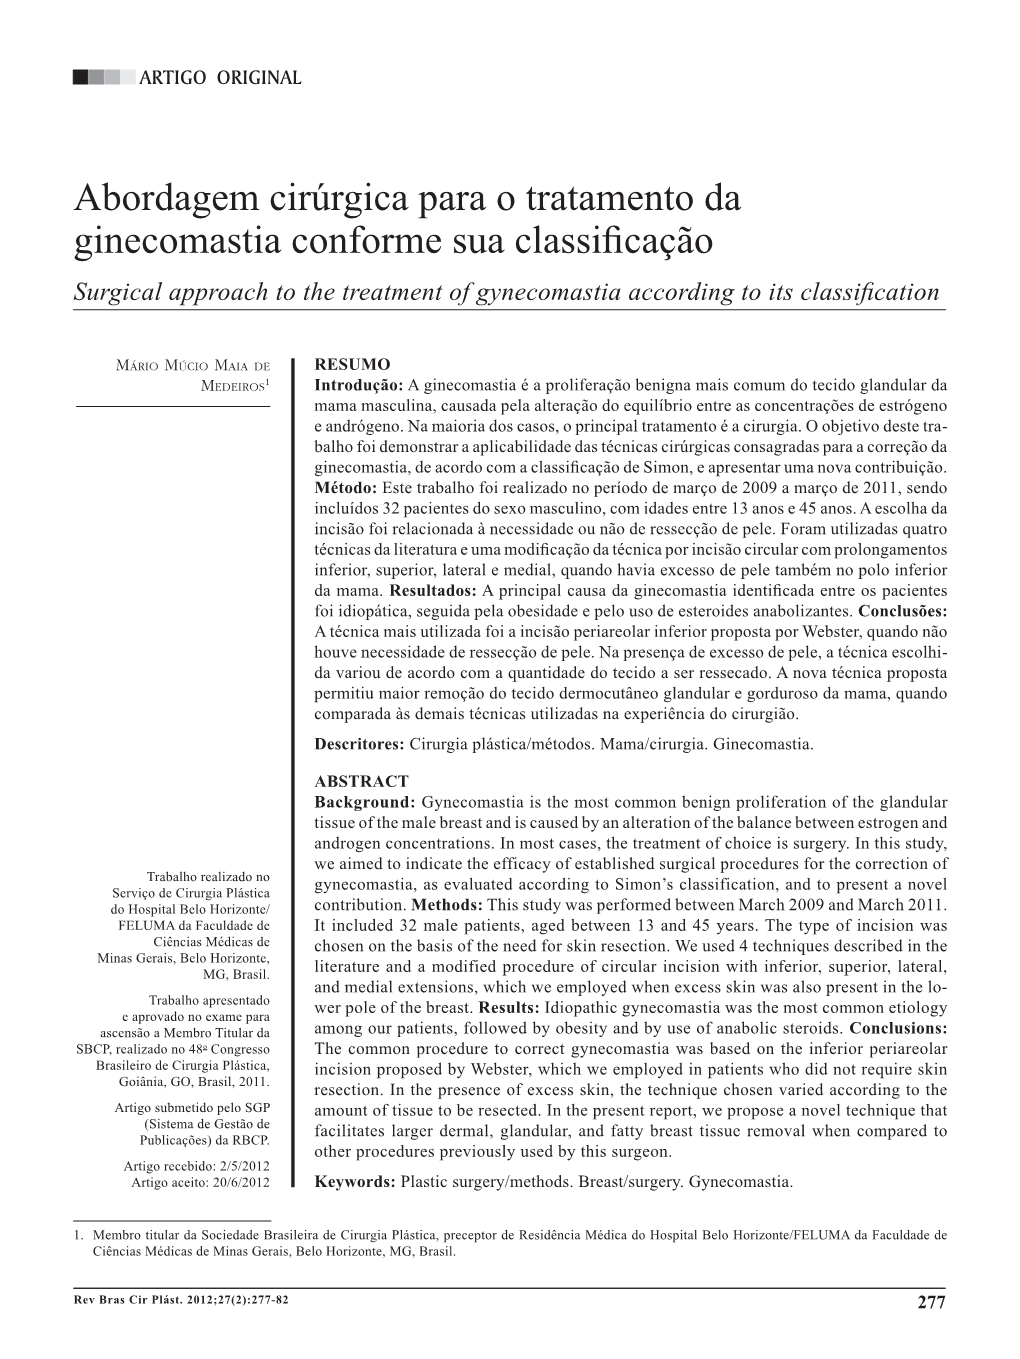 Surgical Approach to the Treatment of Gynecomastia According to Its Classification